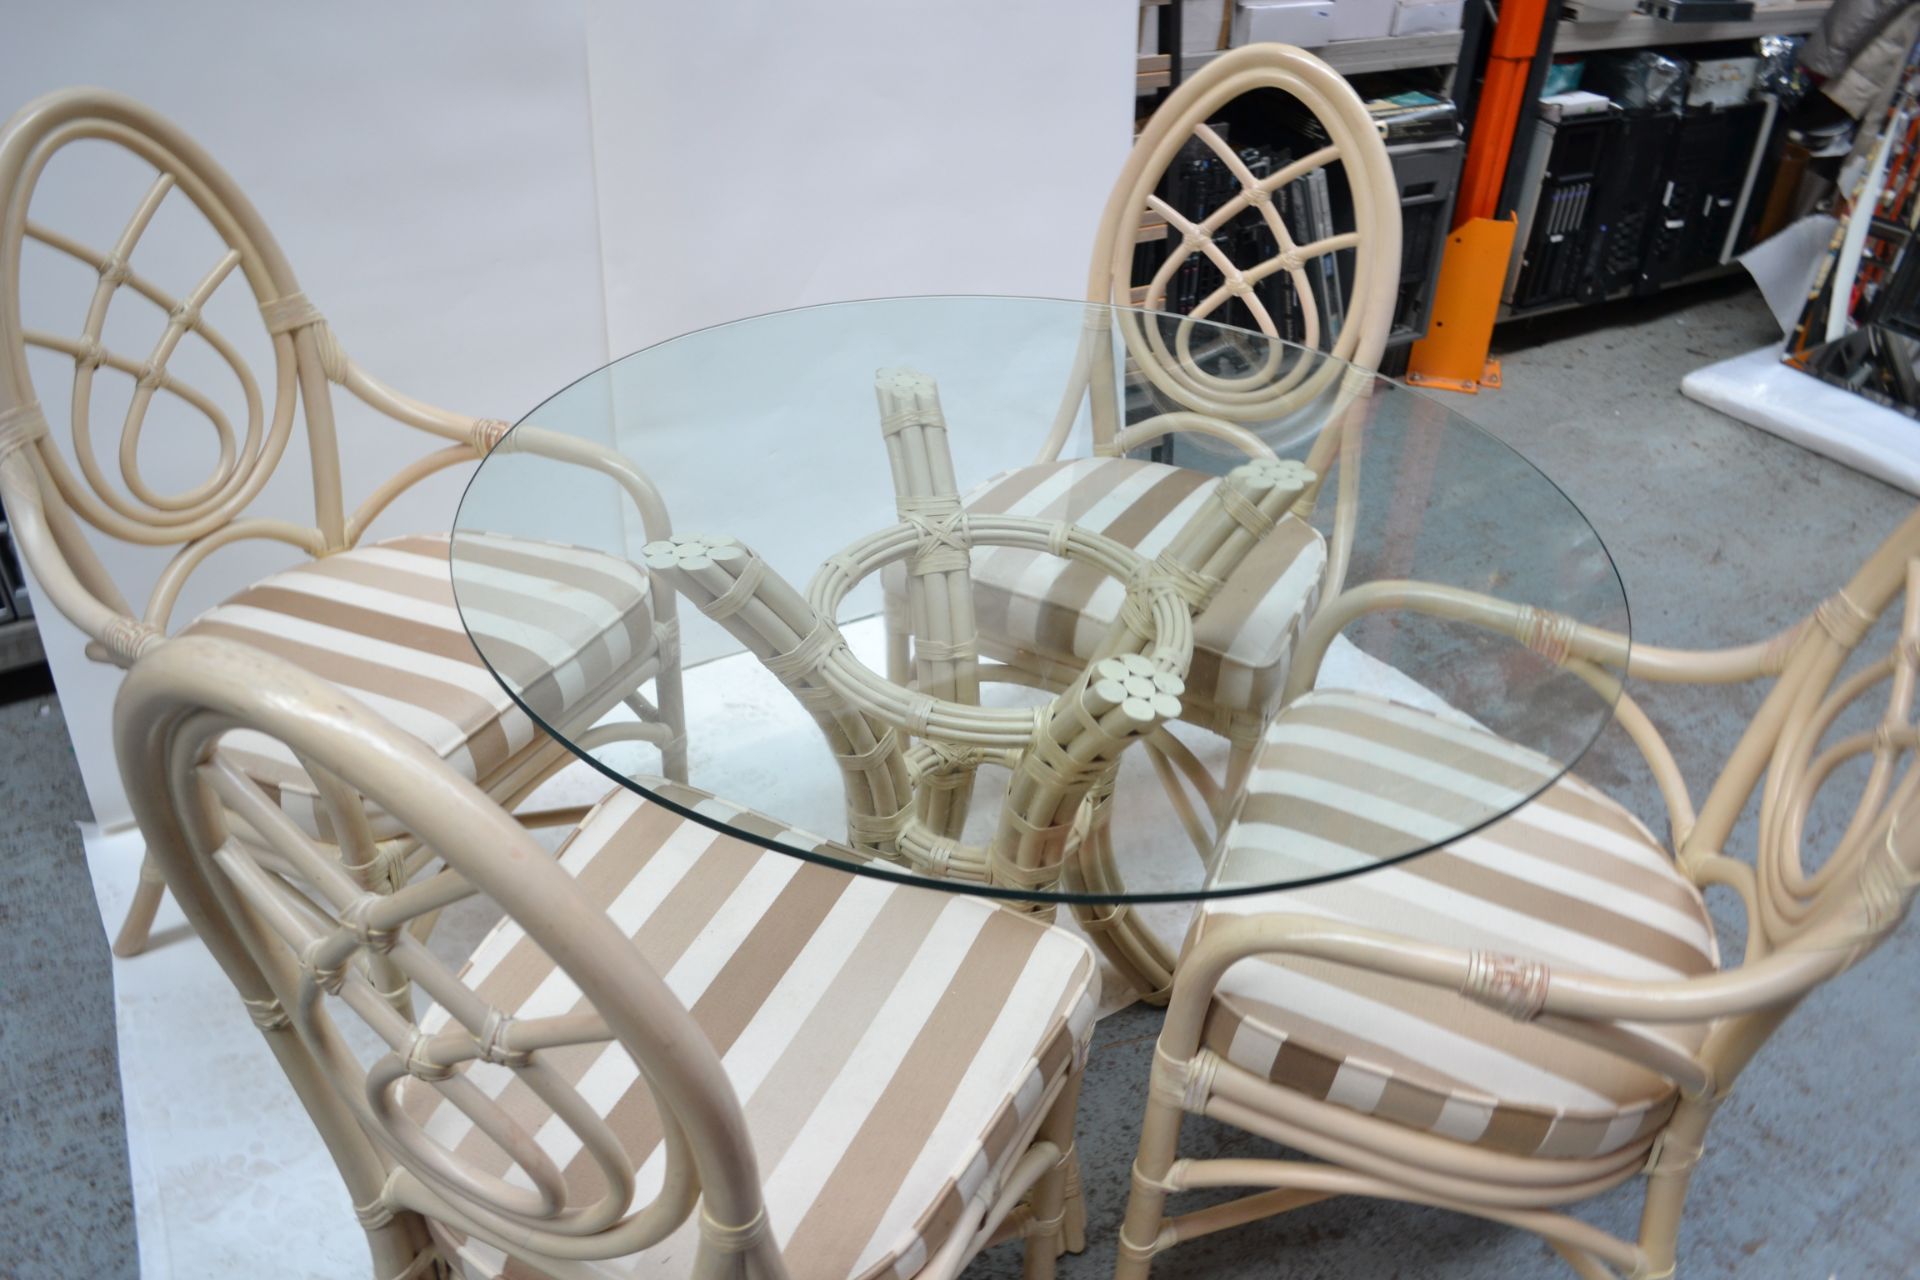 Glass Topped Cane Table with 4 Chairs - AE010 - CL007 - Location: Altrincham WA14 Dimensions: - Image 14 of 14